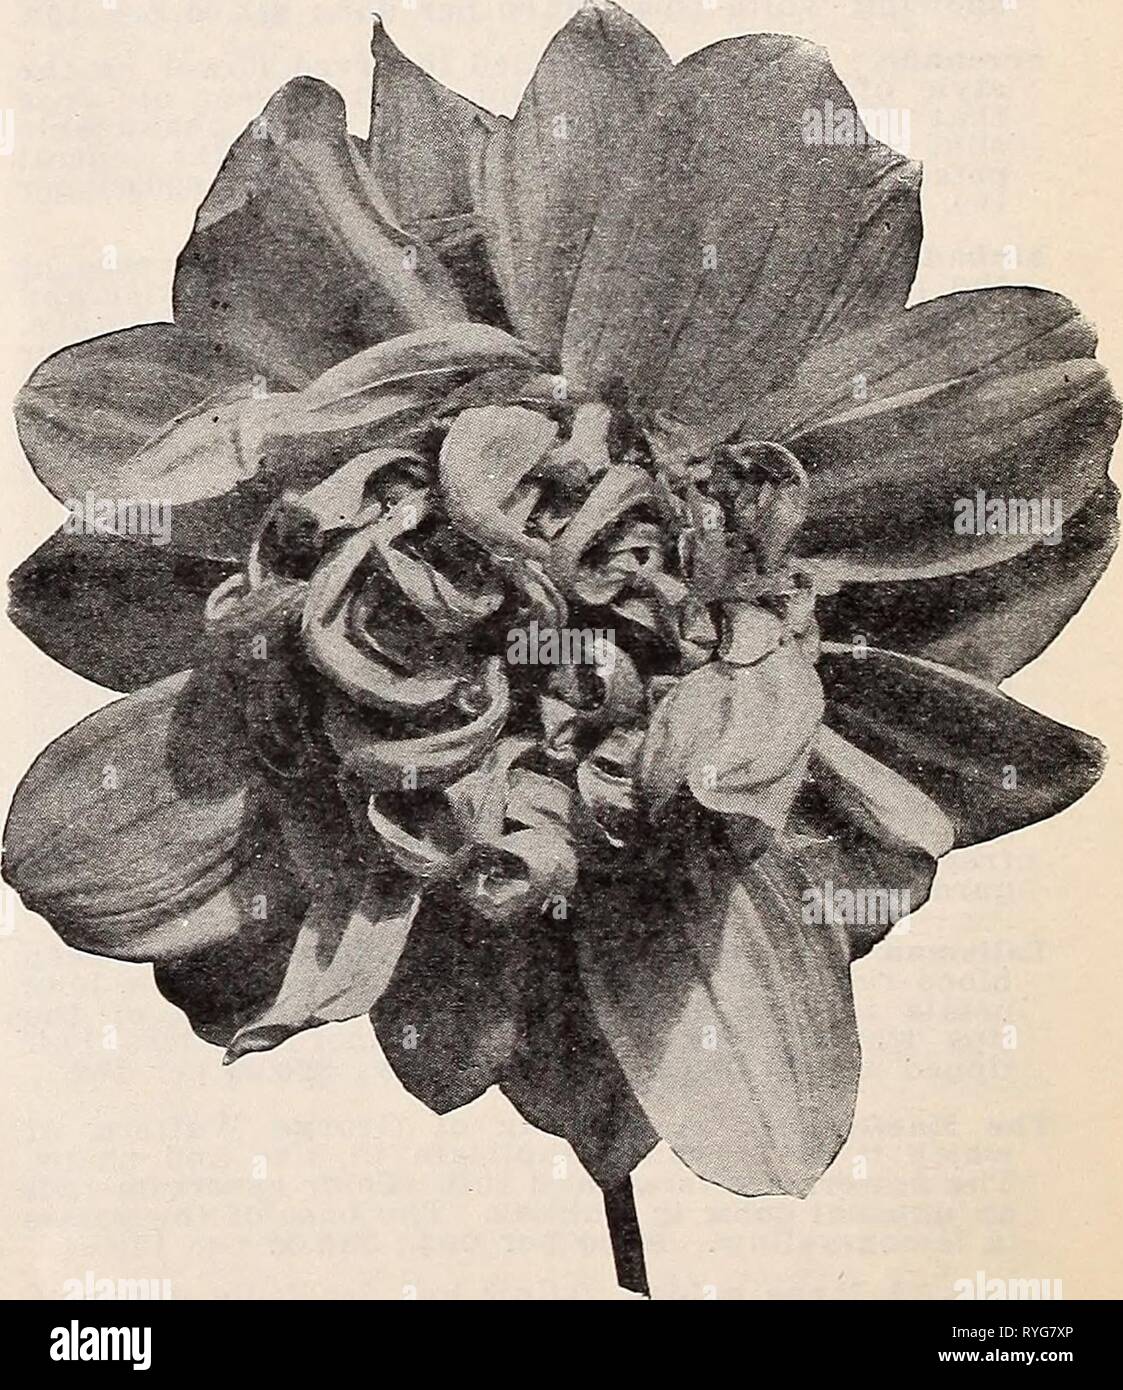 Dreer's wholesale price list for florists : special spring edition  dreerswholesalep1932henr 2 Year: 1932  Double Pompon Dahlias Peony-Flowered Dahlias Drum Major. One of the largest of this type, which under ordinary culture attains a size of over 8 inches; in color, it is a brilliant, rich, fiery-red in- tensified by a lemon-yellow centre with which the ' petals are also more or less tipped and marked. $2.50 per doz.; $20.00 per 100. Hampton Court. A bold flower of bright mauve-pink. $1.50 per doz.: $10.00 per 100. Mexico. Brilliant cardinal red with golden markings and suffusion, one of the Stock Photo